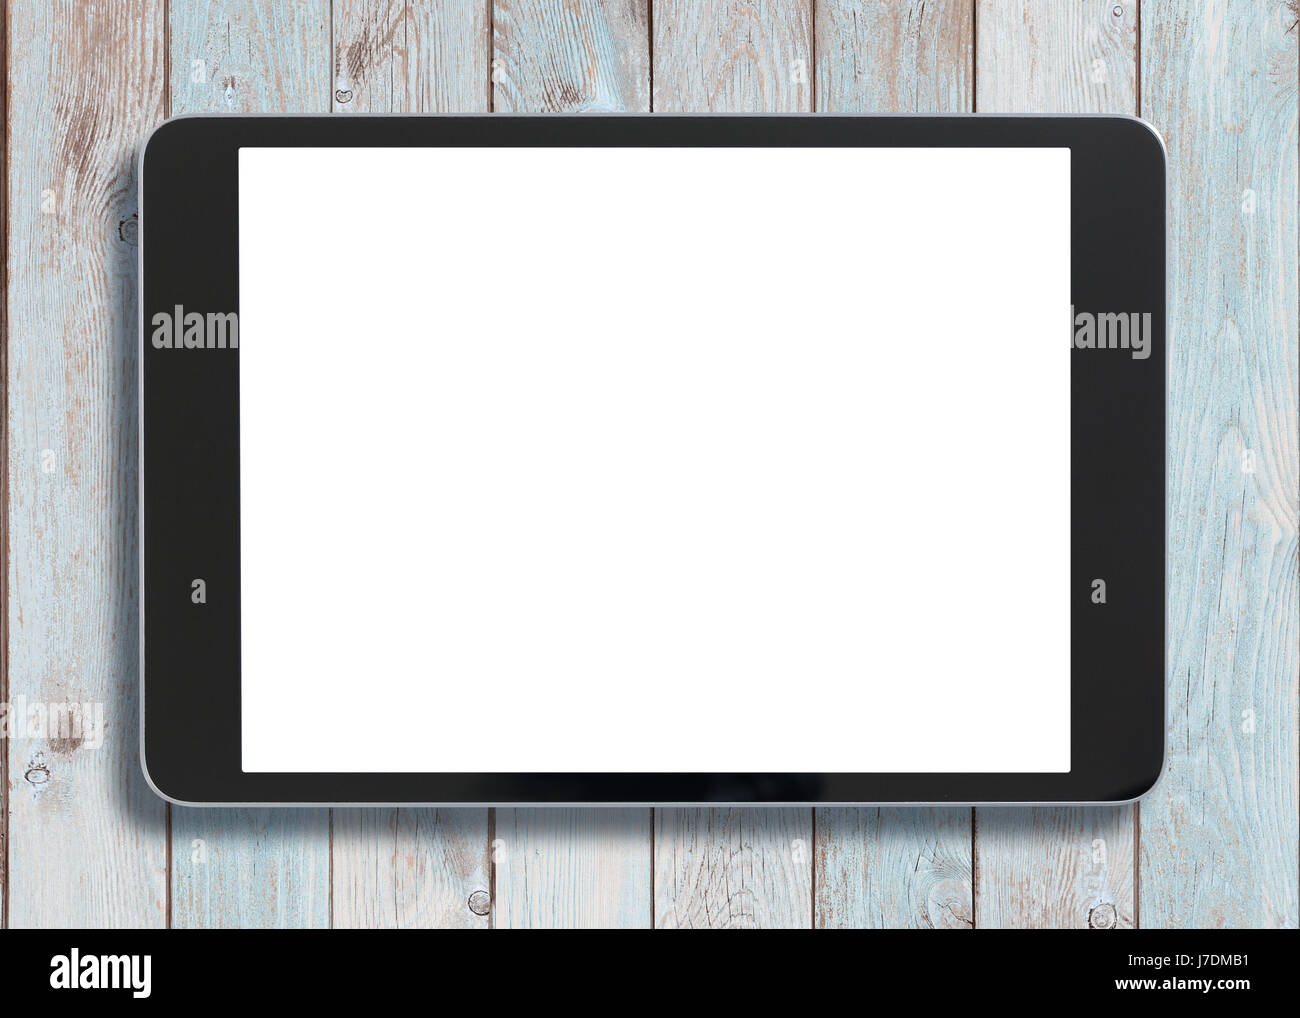 Black tablet pc looking similar to ipad on old white wood background Stock Photo